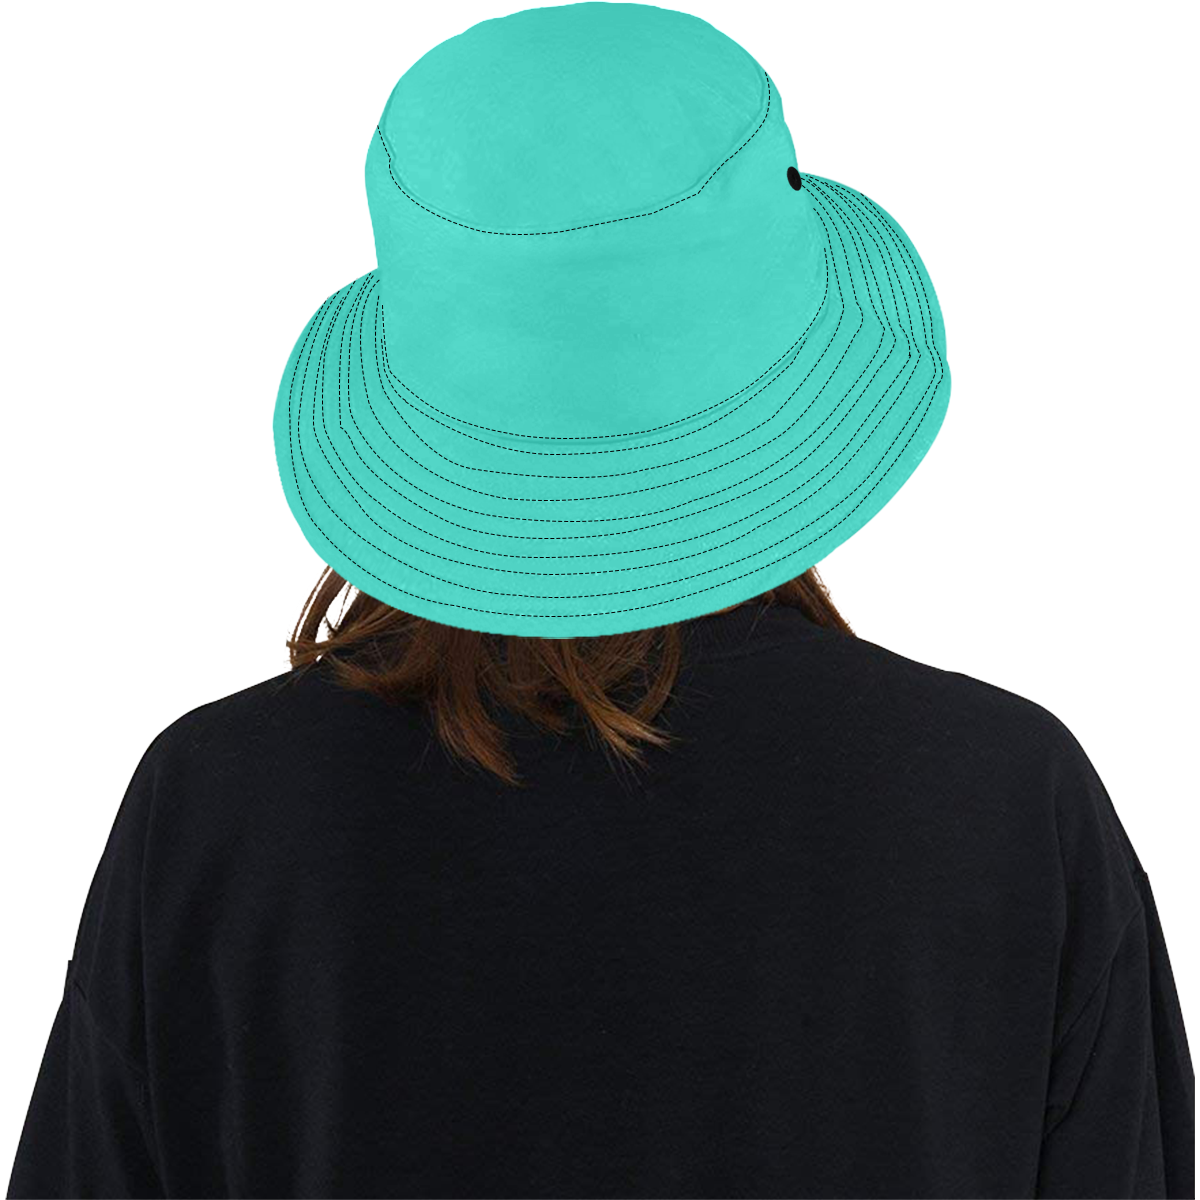 color turquoise All Over Print Bucket Hat